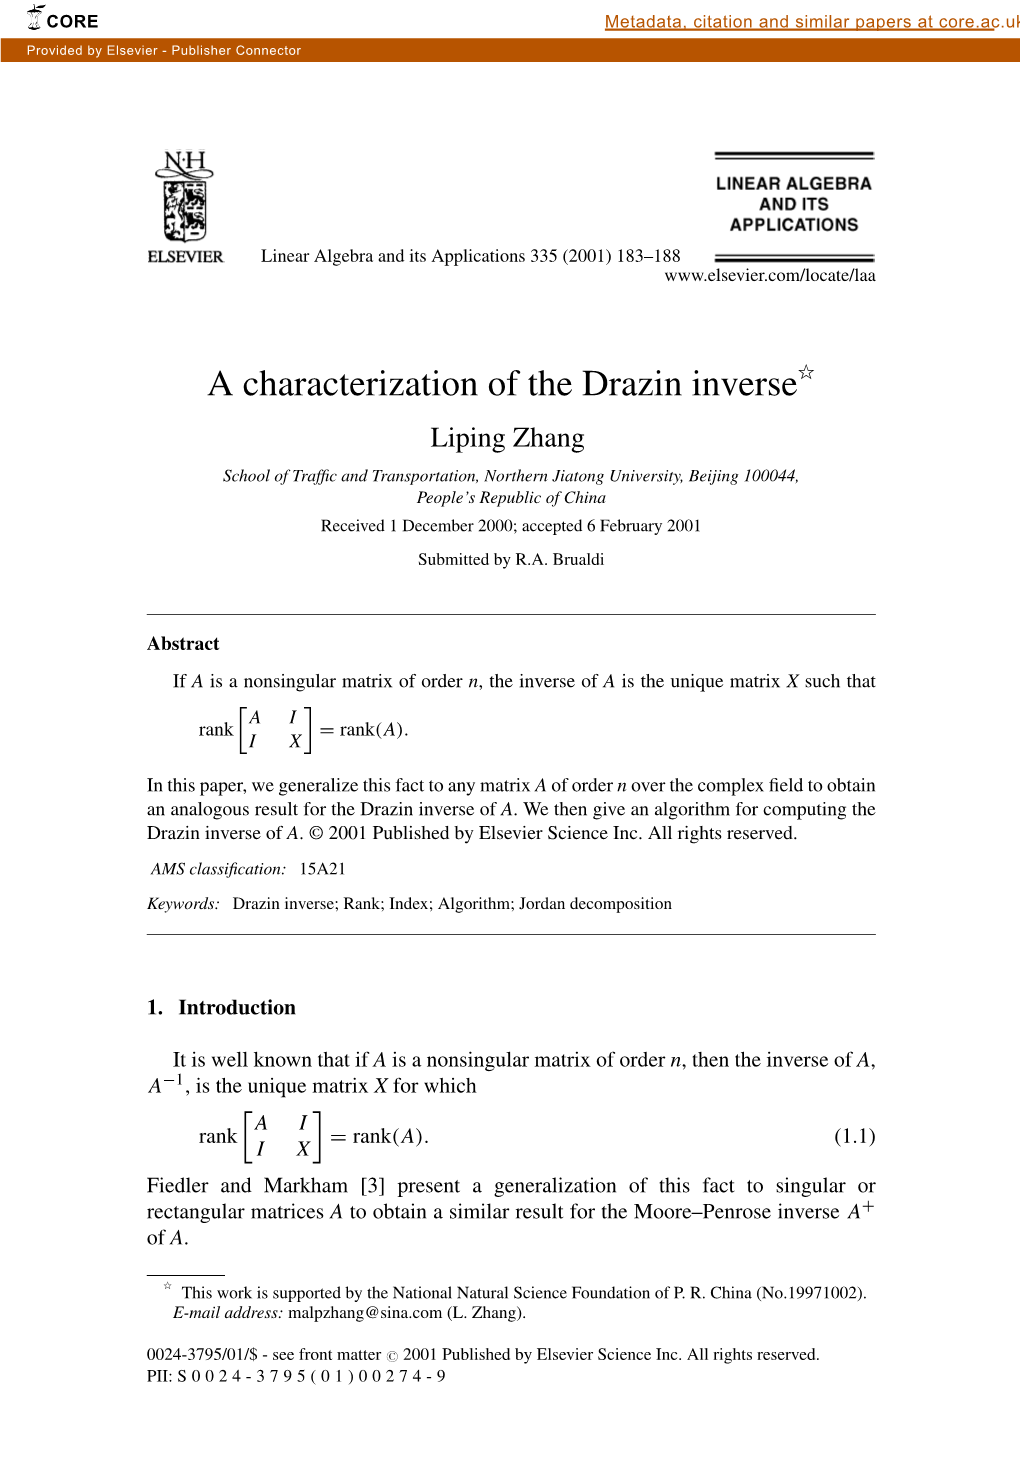 A Characterization of the Drazin Inverse